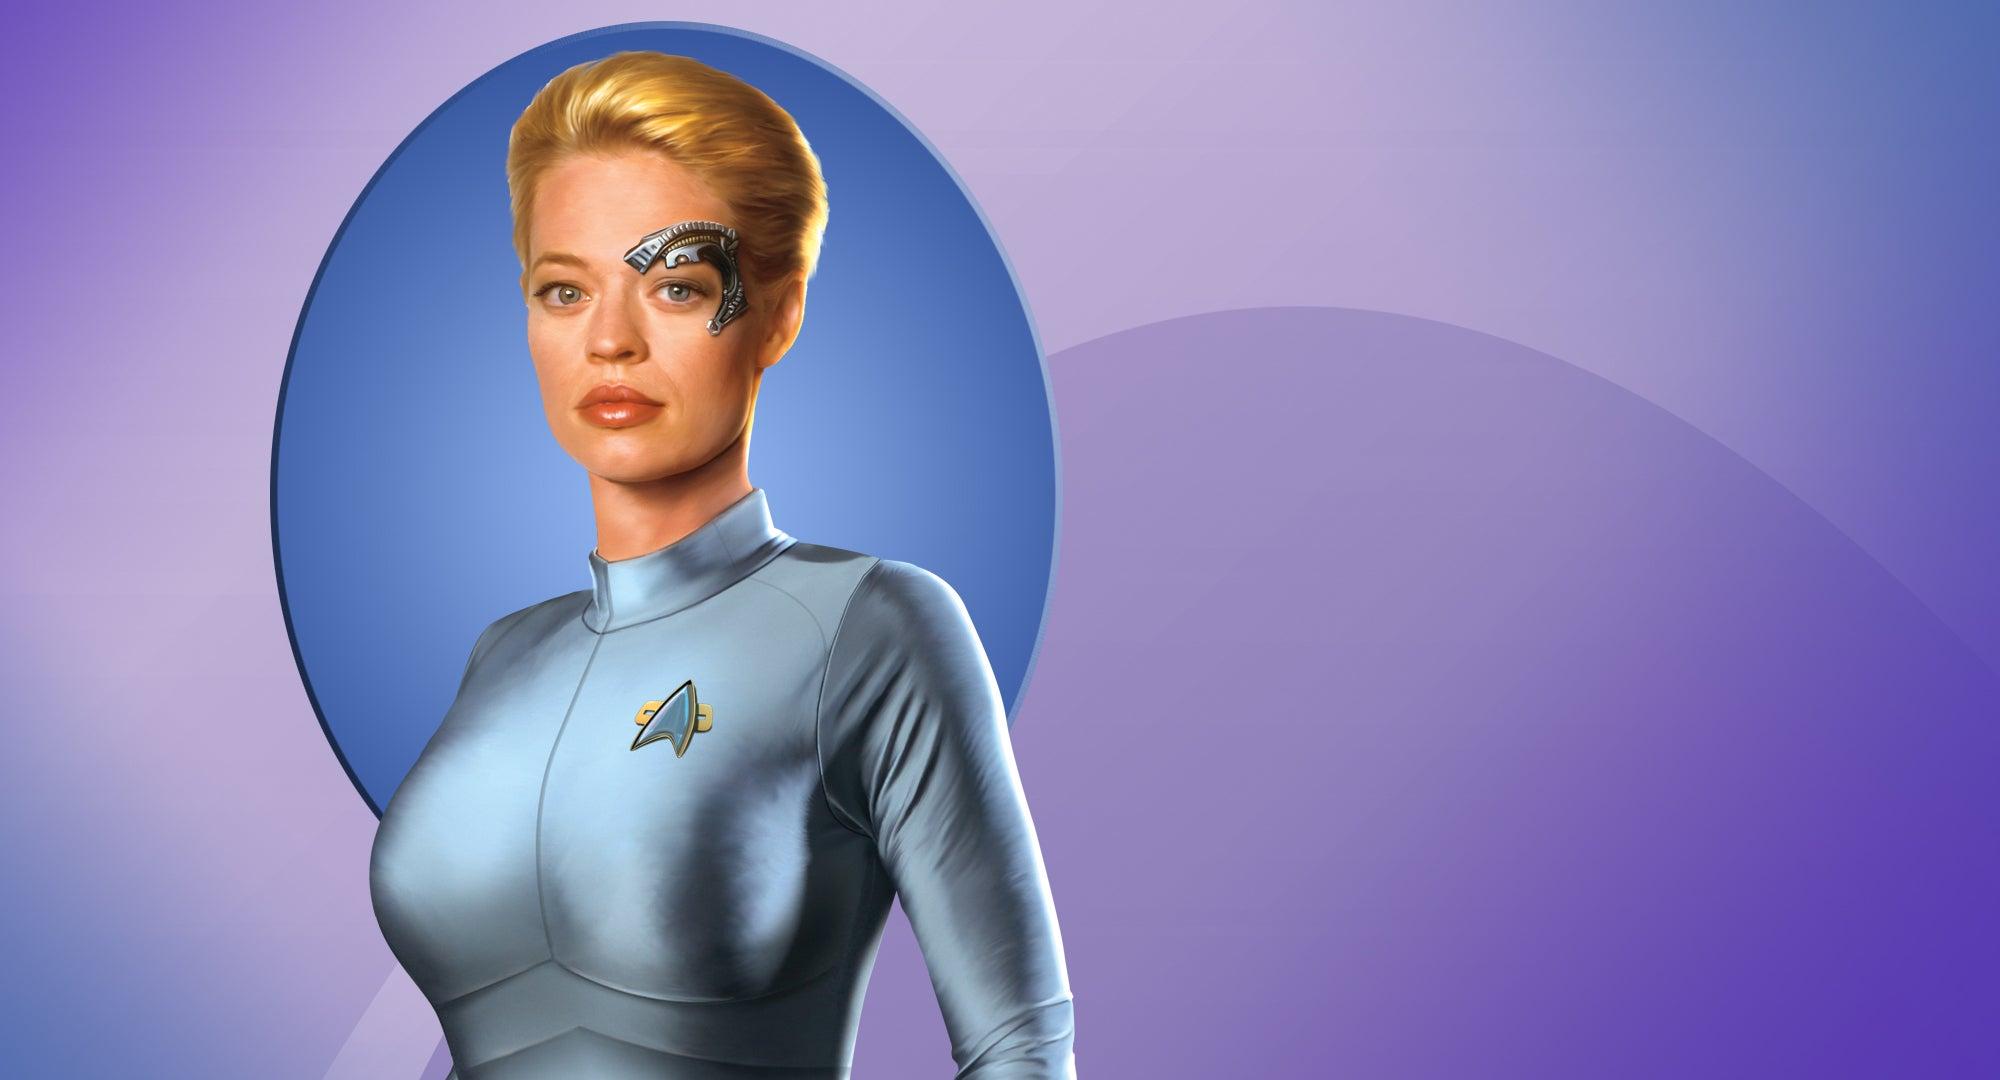 Choosing the Sweater: On Seven of Nine's New Look